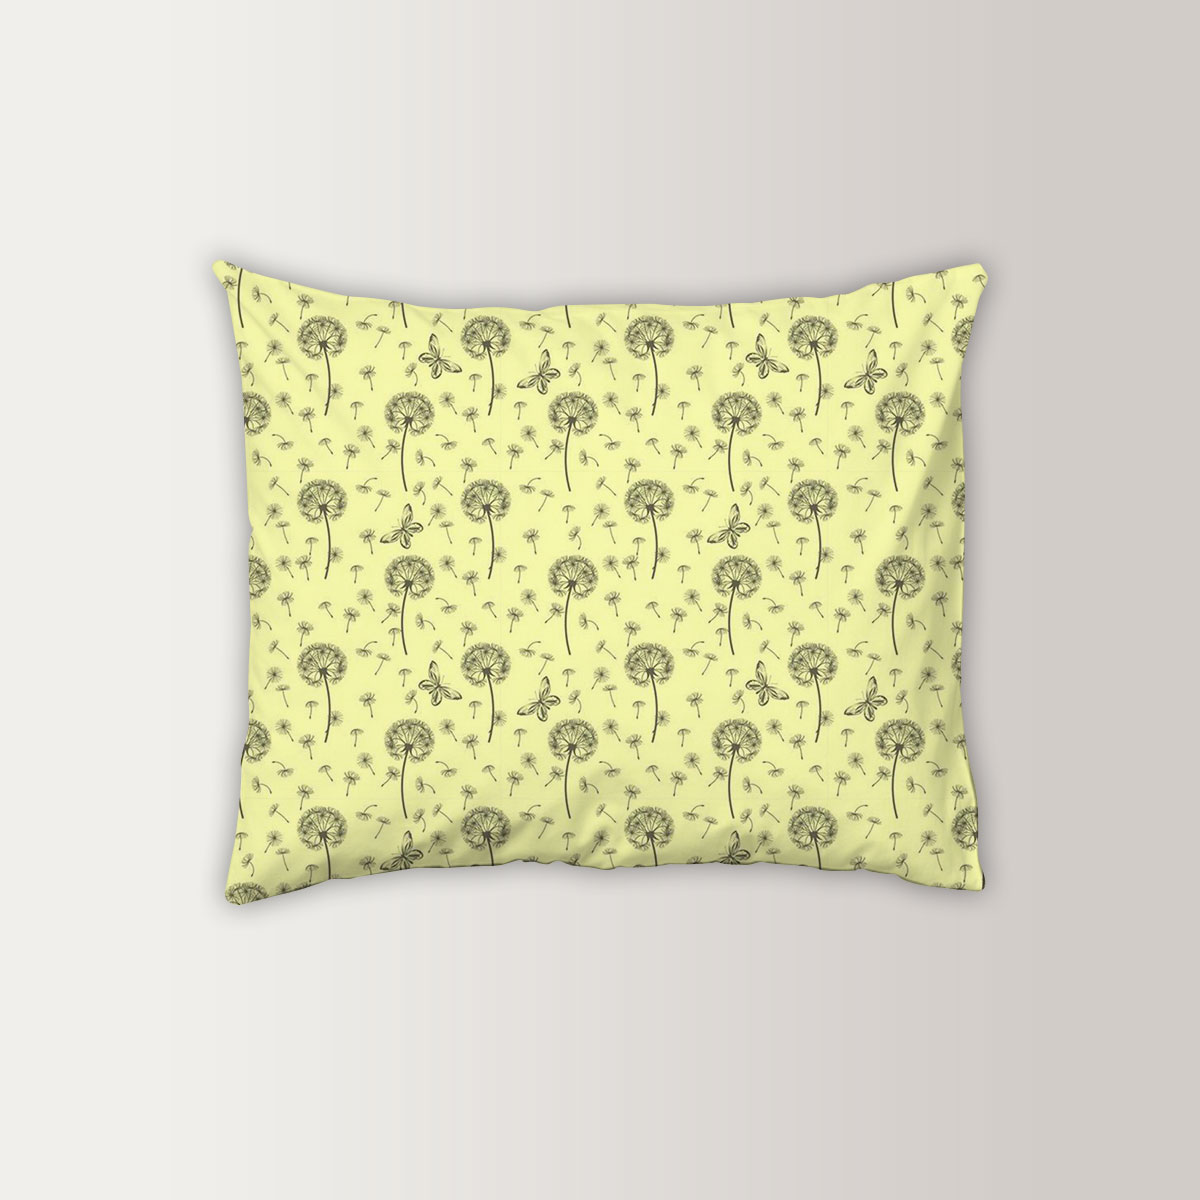 Dandelions And Butterflies On Yellow Background Pillow Case